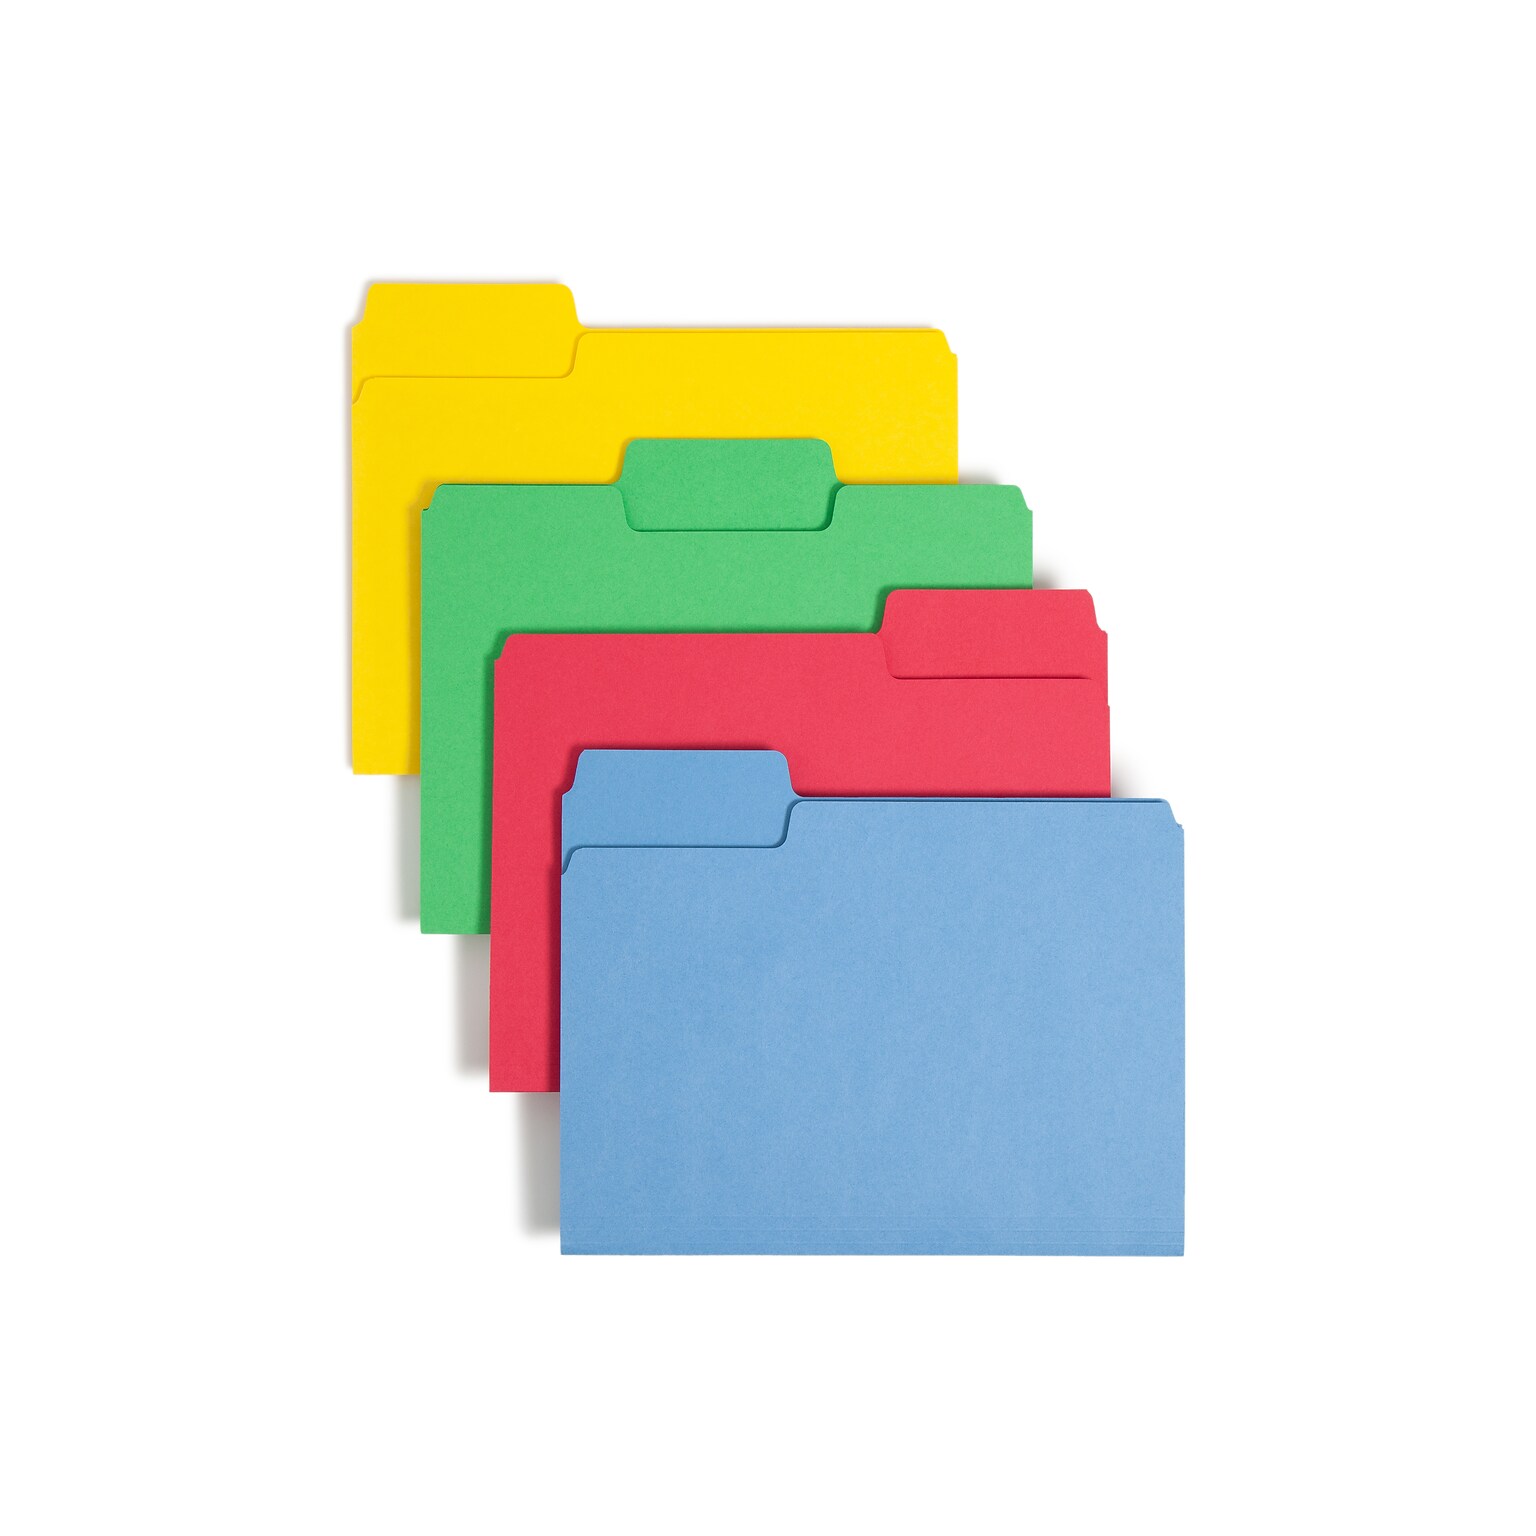 Smead SuperTab File Folder, Oversized 1/3-Cut Tab, Letter Size, Assorted Colors, 24 per Pack (11956)